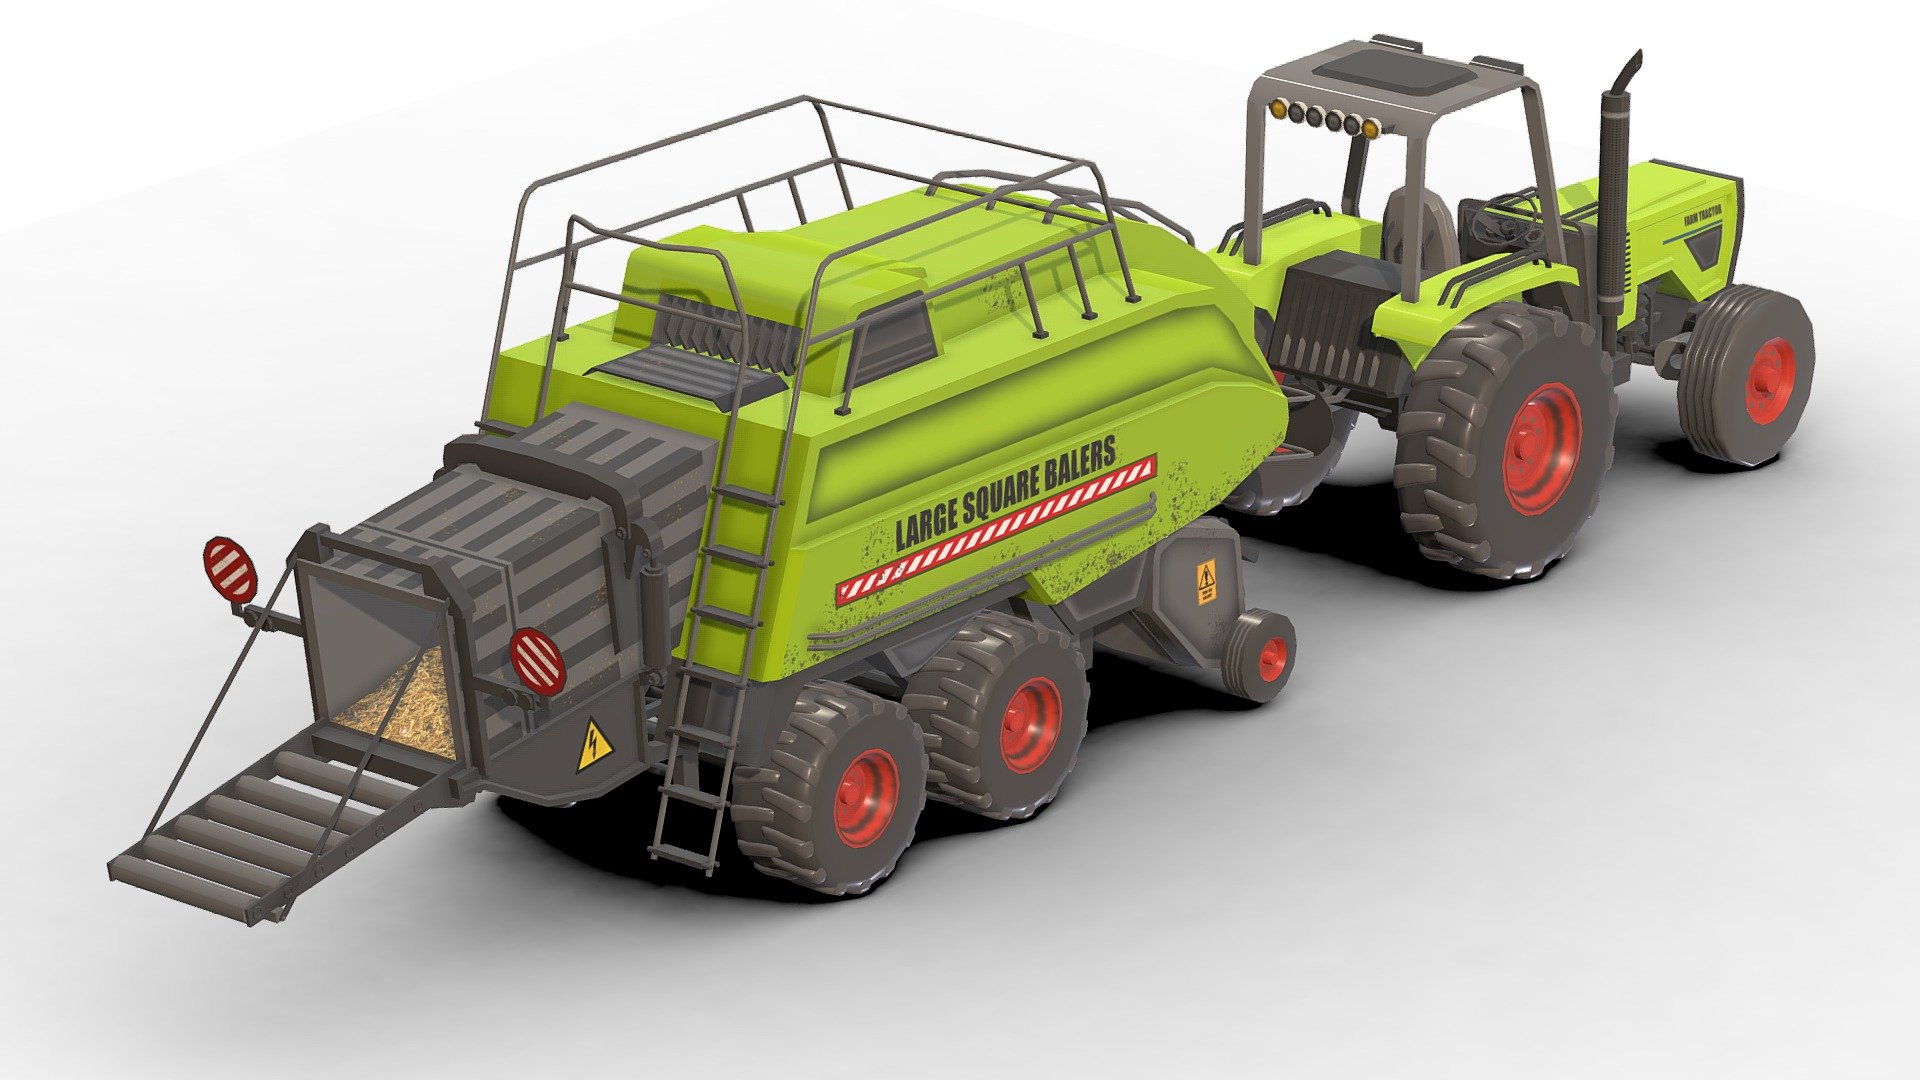 Farm Tractors And Bulldozers Low_Poly .

You can use these models in any game and project.

This model is made with order and precision.

Separated parts (bodys . wheels . Steer . Bulldozers ).

Very Low- Poly.

Truck have separate parts.

Average poly count: 38,000 tris.

Texture size: 2048 / 1024 (PNG).

Number of textures: 3.

Number of materials: 3.

Format: Fbx / Obj / 3DMax .

The original files are in the Additional file .

Wait for my new models.. Your friend (Sidra) 3d model